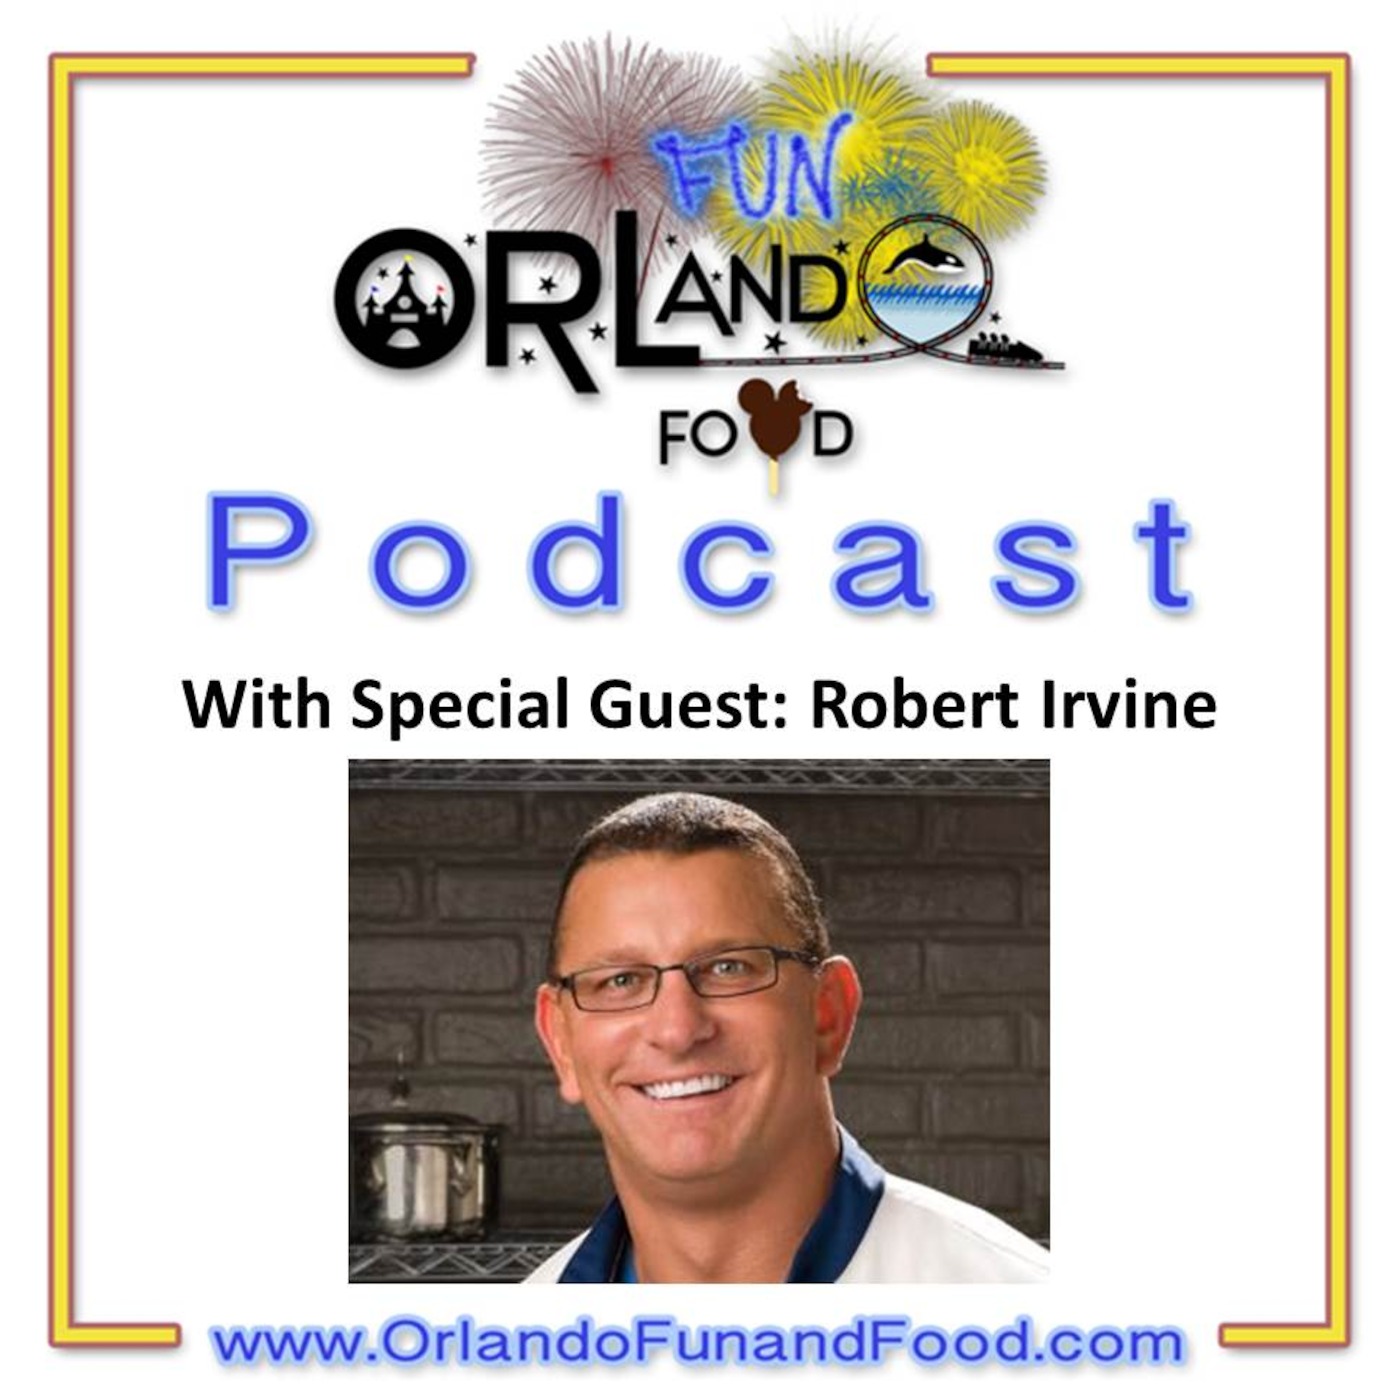 Orlando Fun and Food Podcast Episode 2